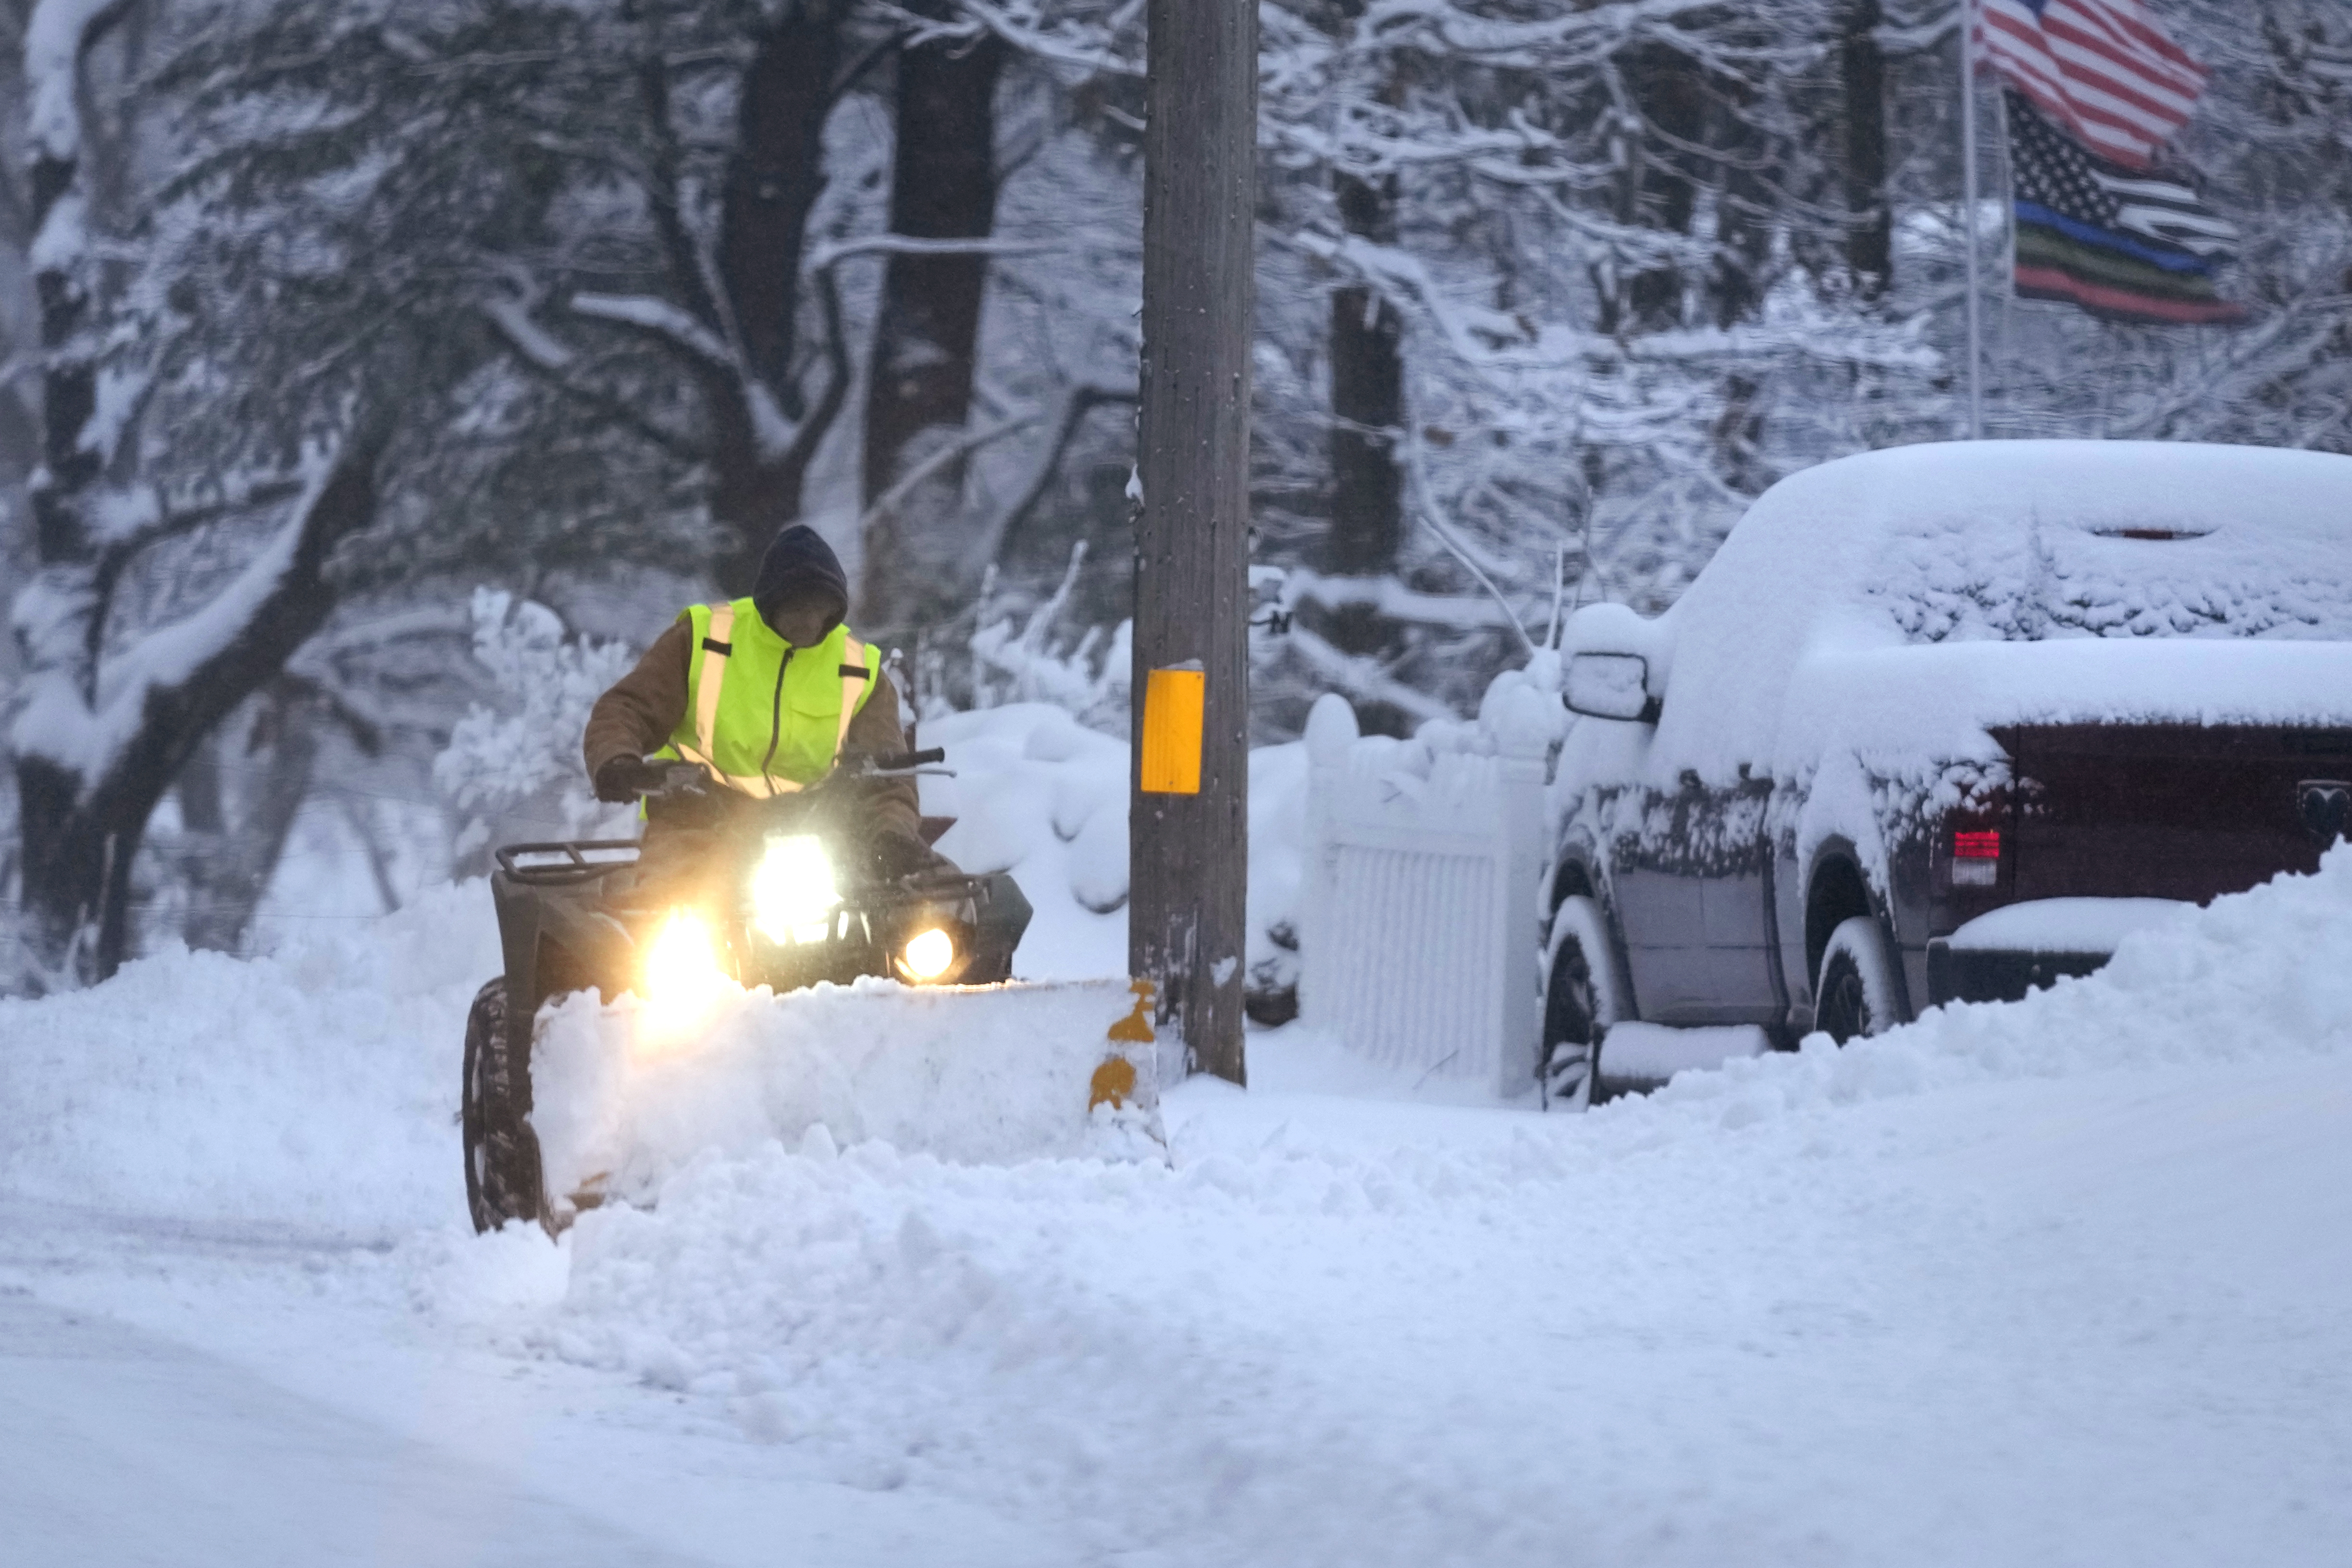 Major winter storms bring snow, ice and travel hazards to both US